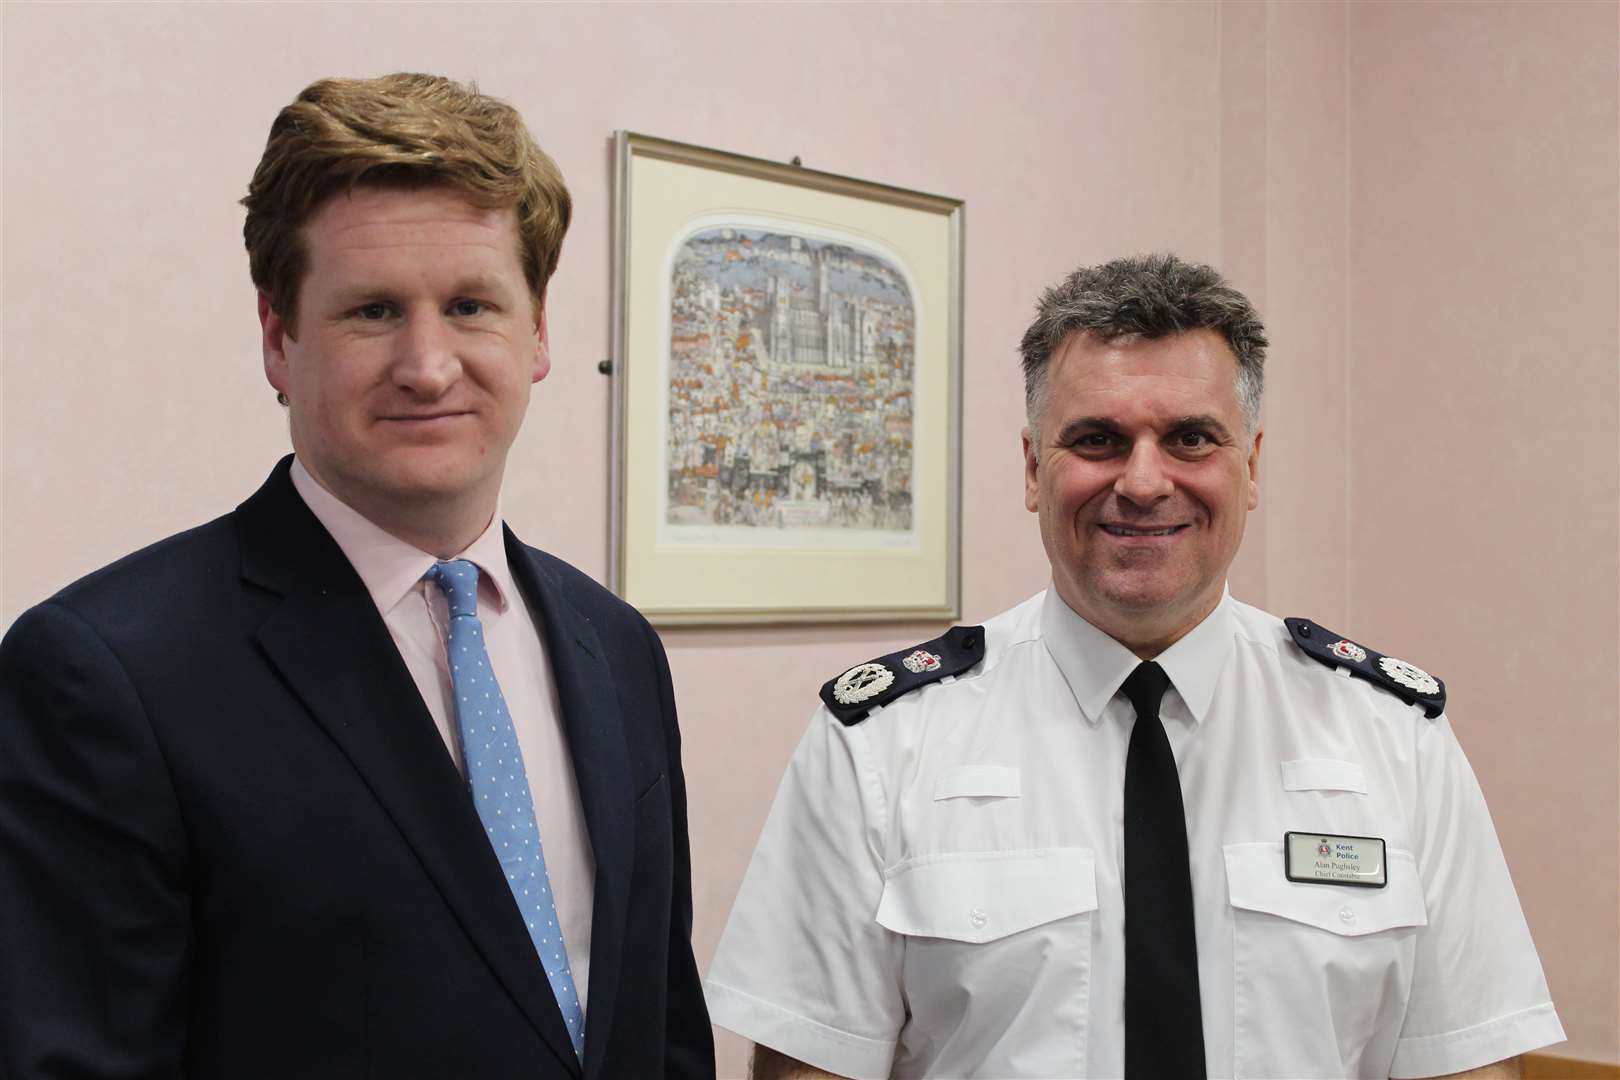 Crime Comissioner Matthew Scott, left, will choose Alan Pughsley's, right, replacement